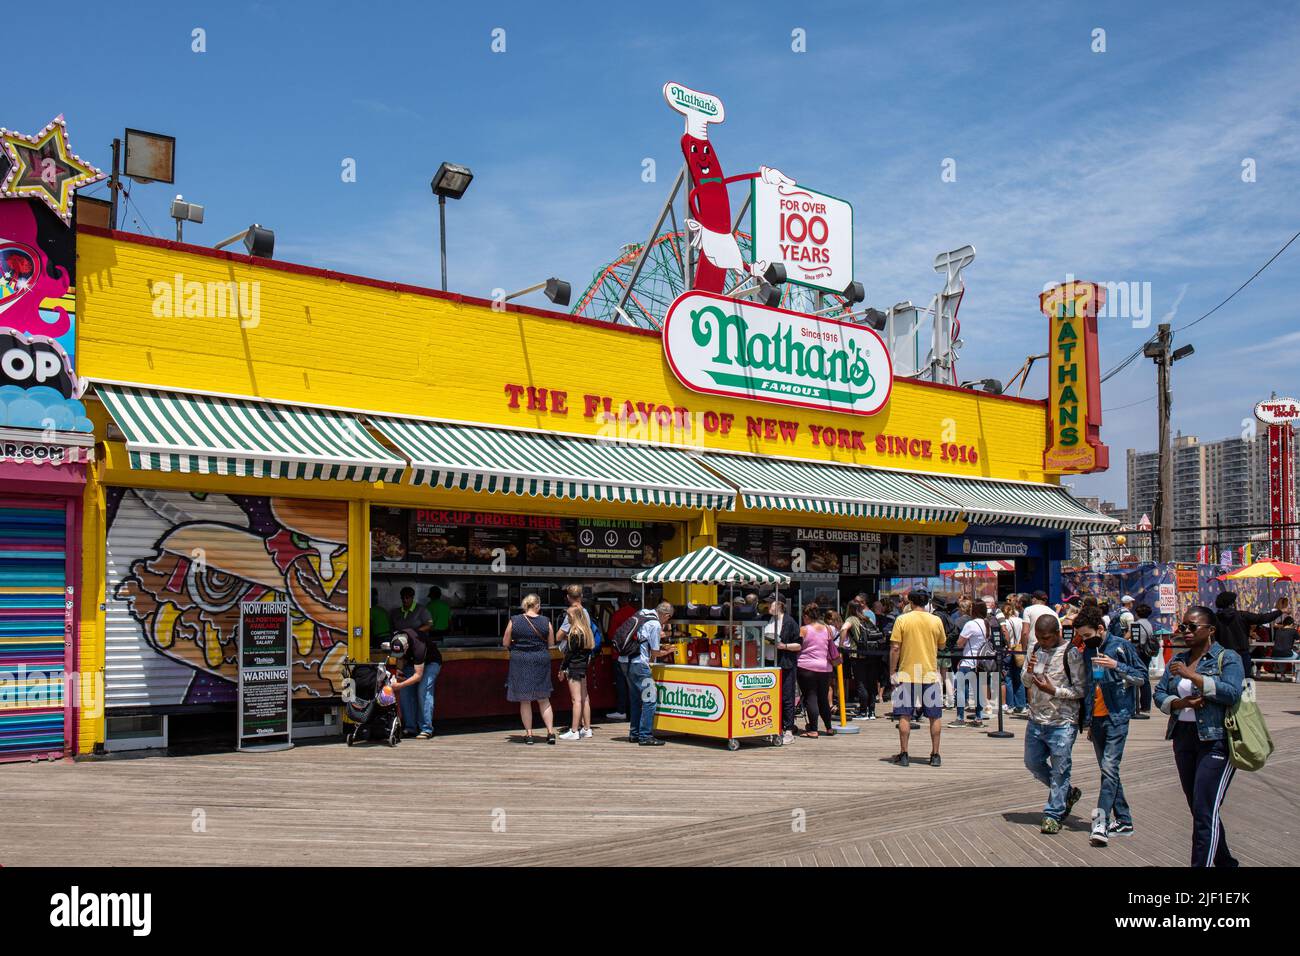 Nathan's Famous fast food restaurant on Riegelmann Boardwalk in Coney Island amusement park in Brooklyn borough of New York City, United States Stock Photo